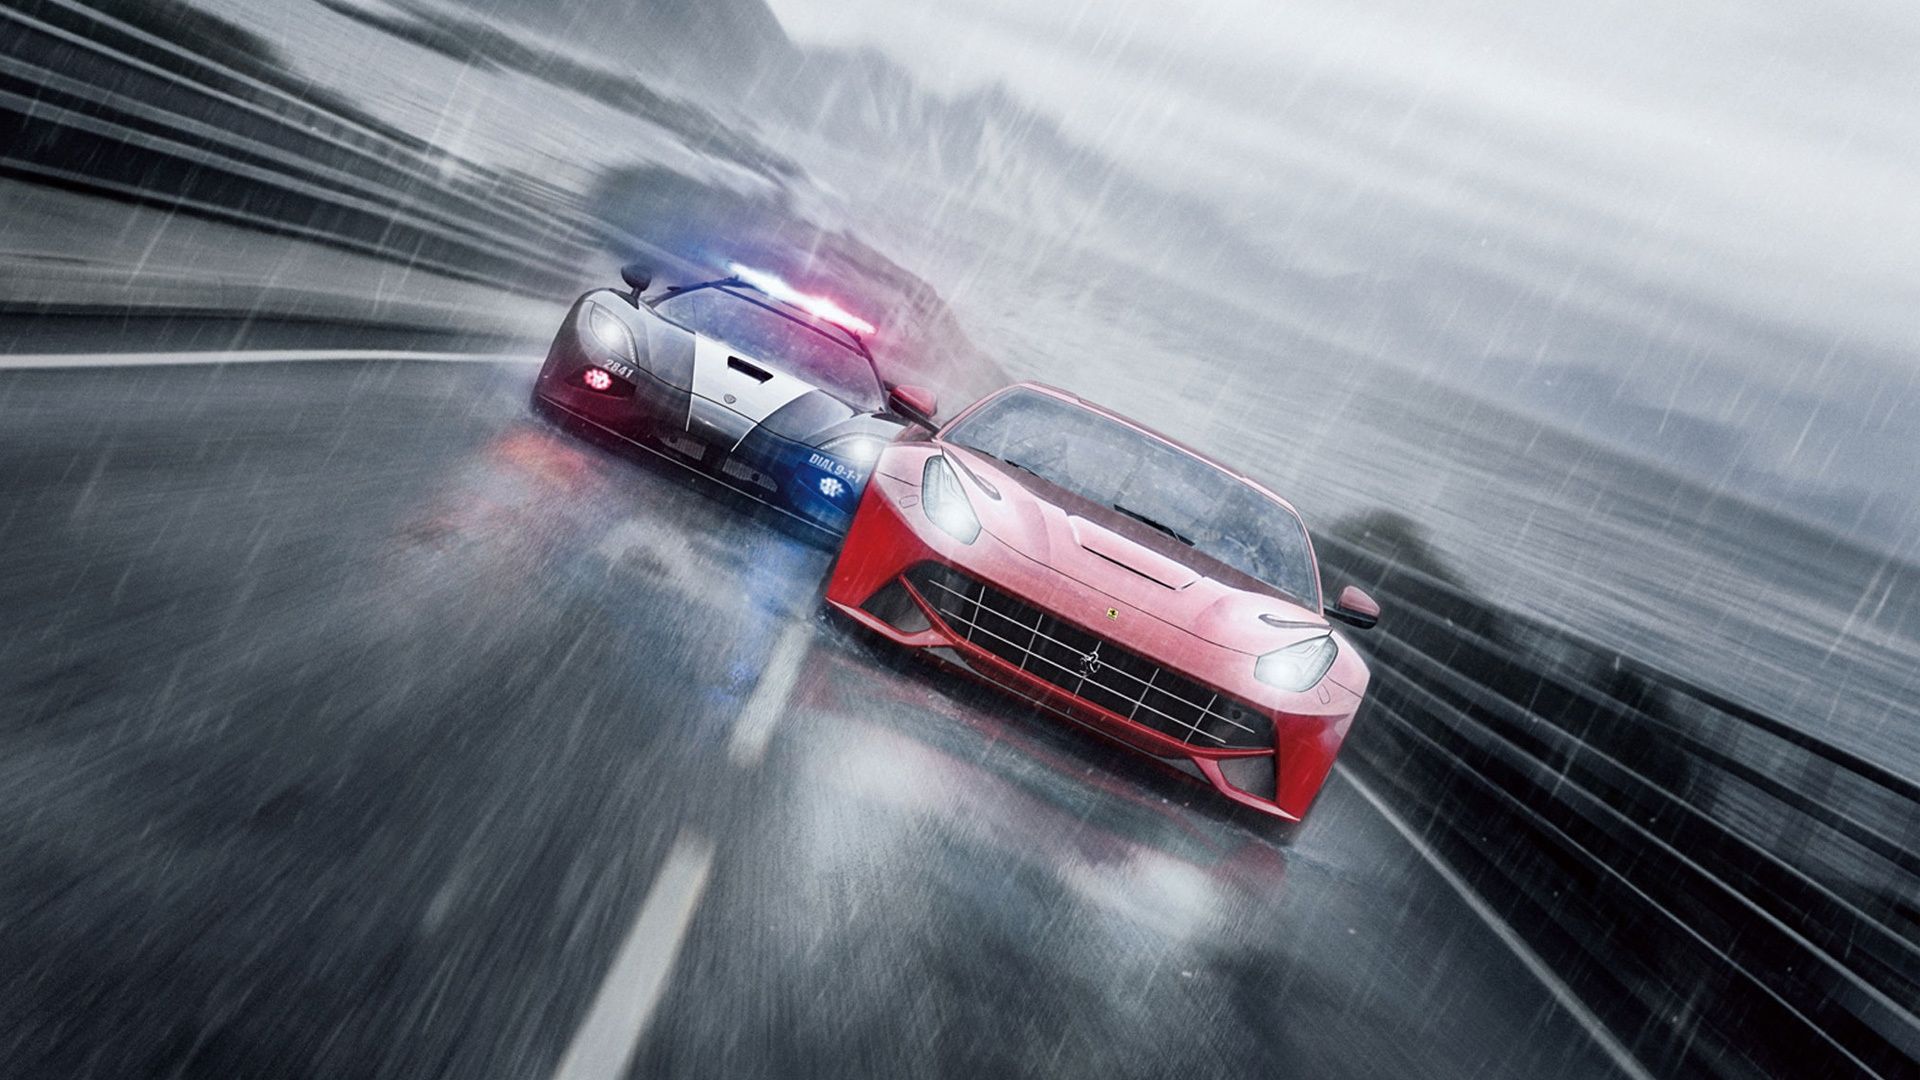 Download 1920x1080 HD Wallpaper need for speed rivals rain highway chase ferrari police, Desktop Background HD